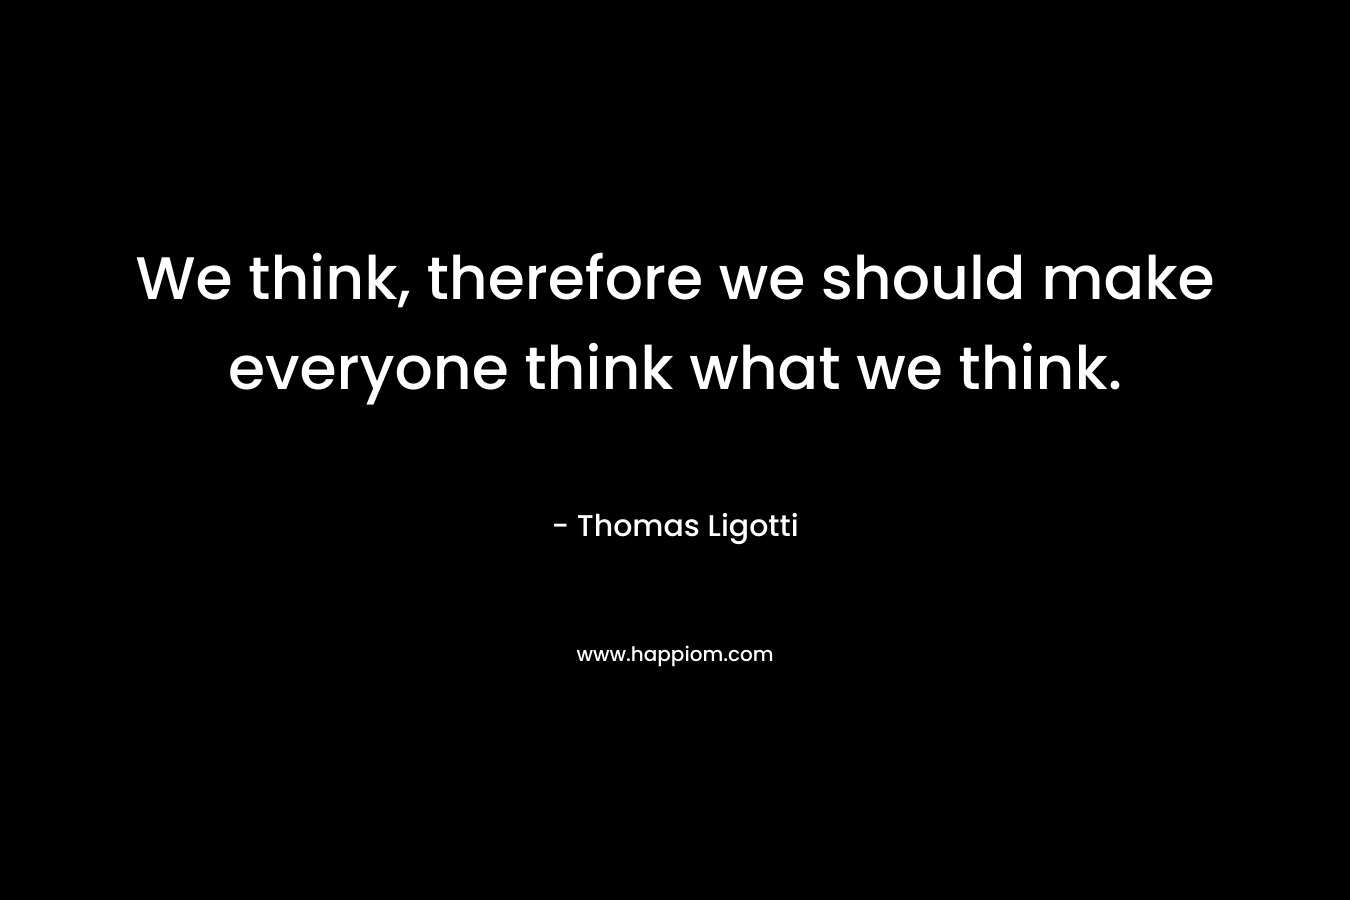 We think, therefore we should make everyone think what we think. – Thomas Ligotti